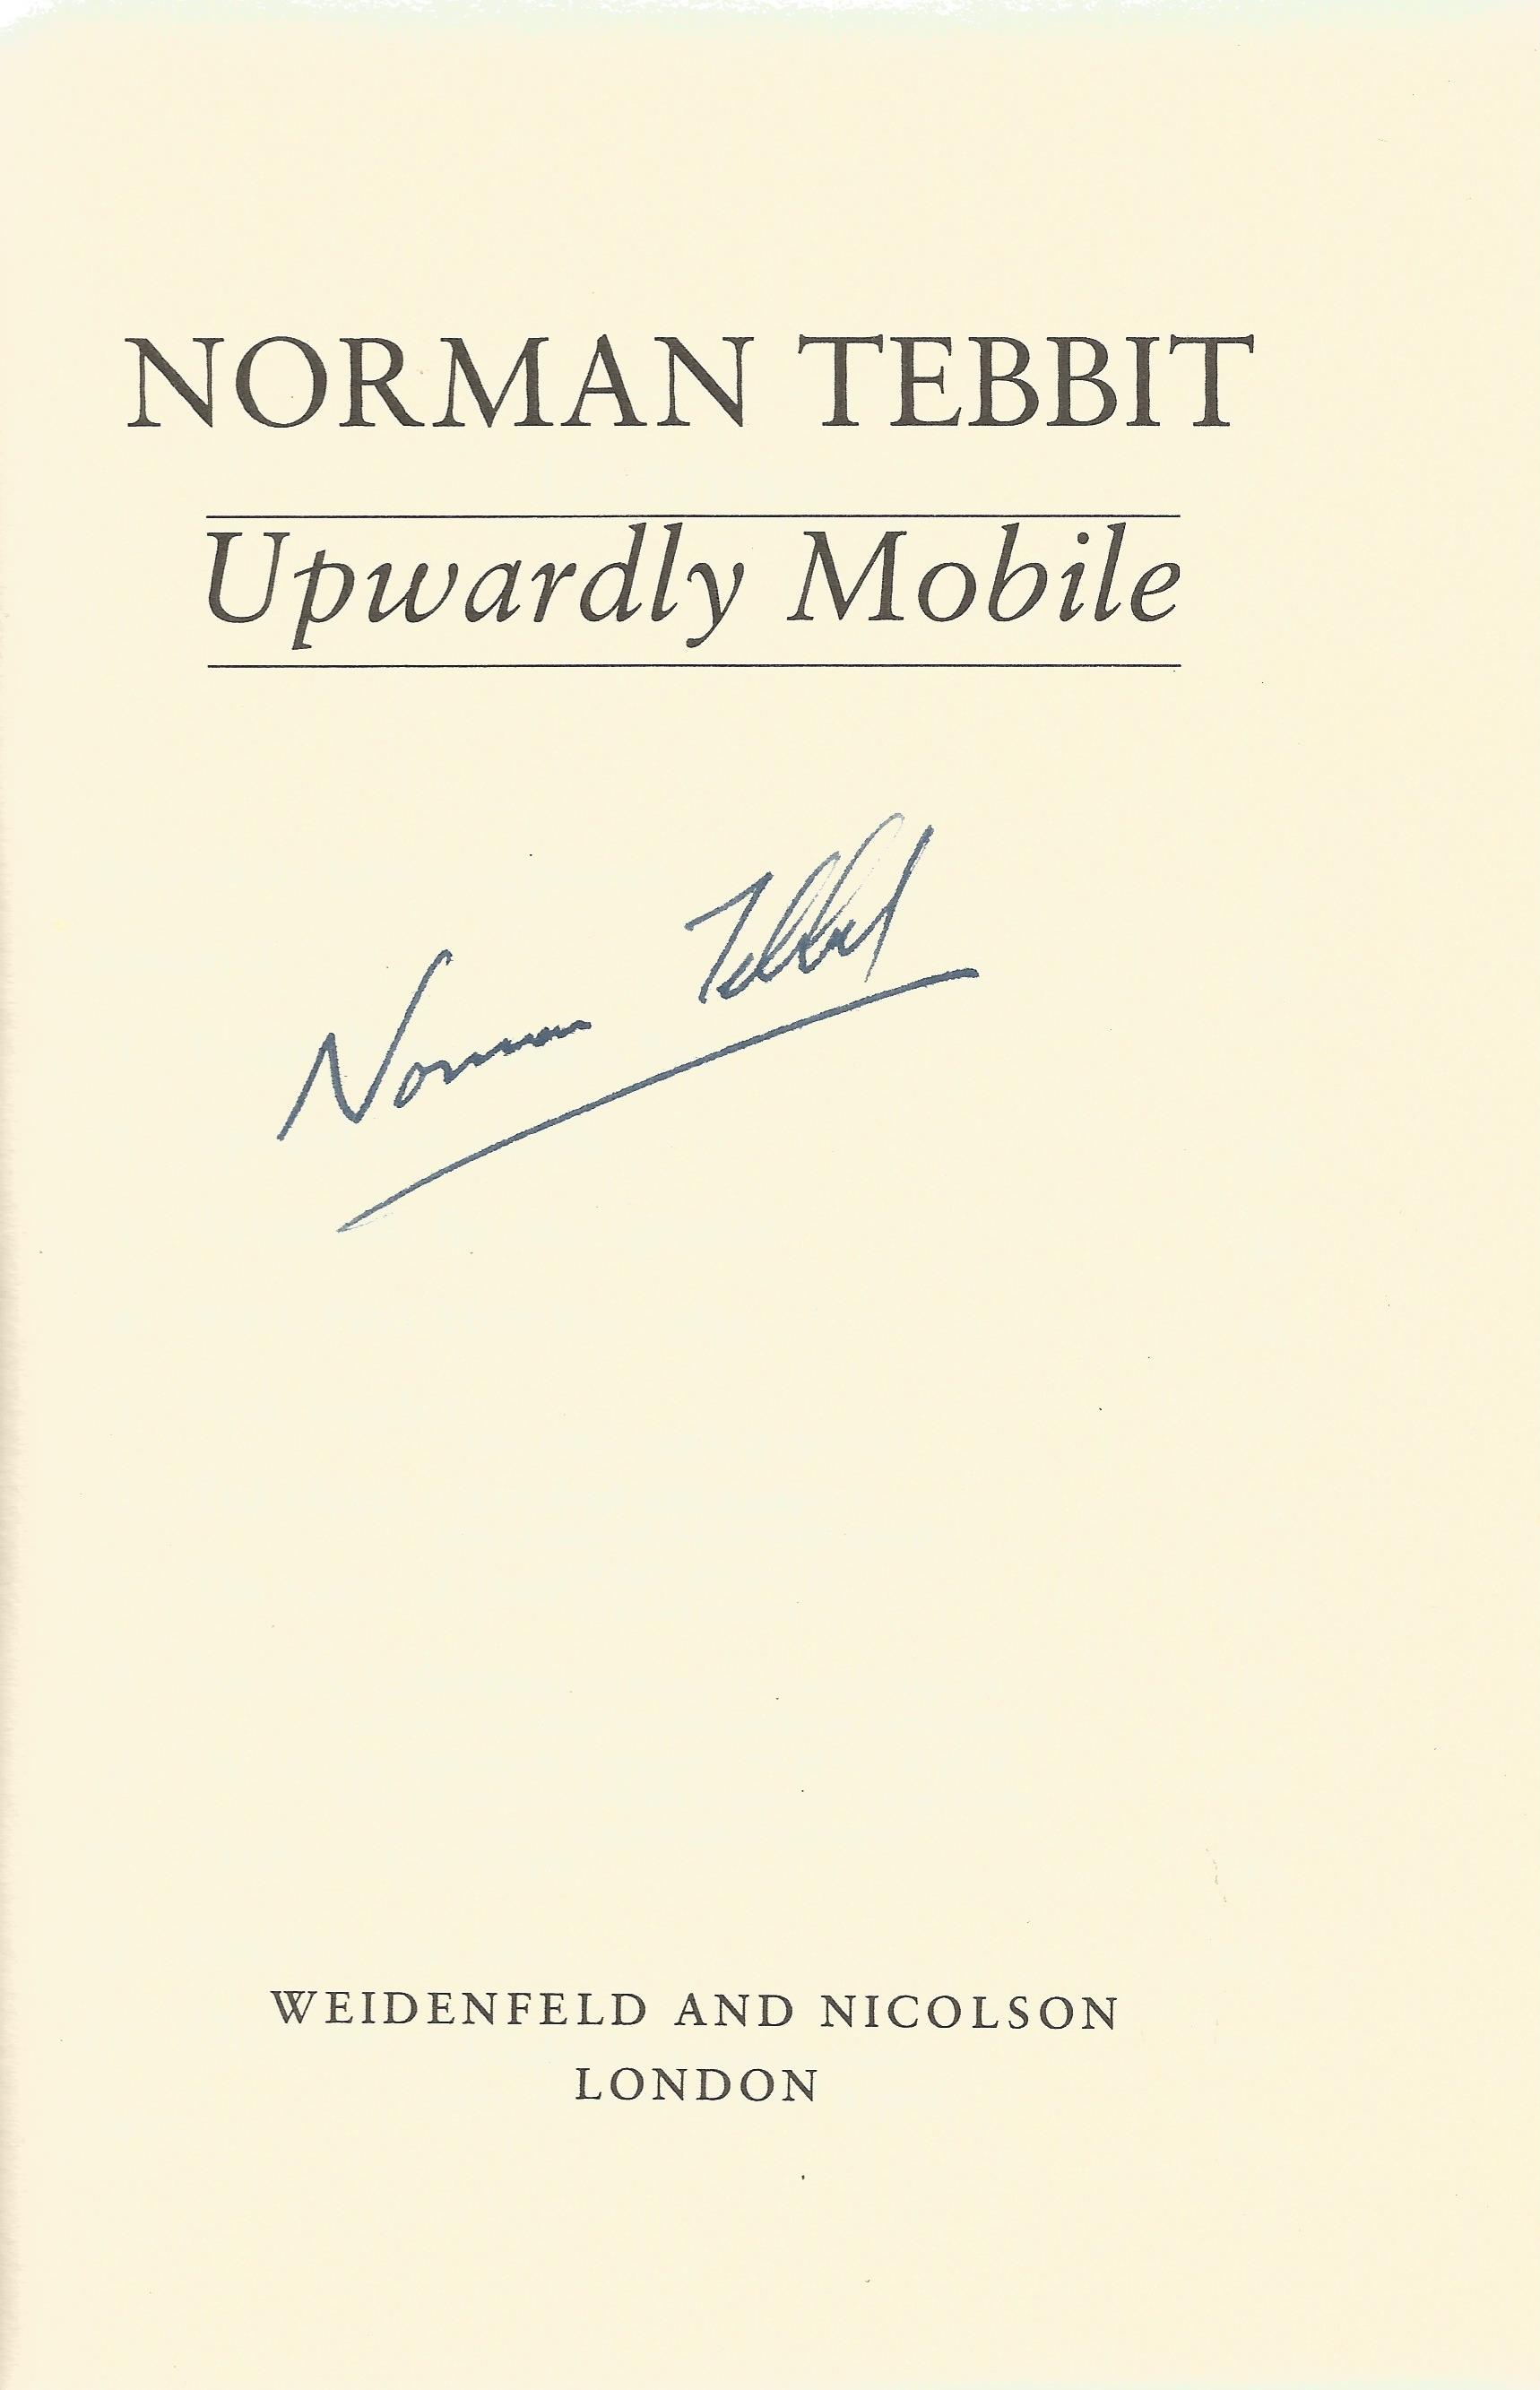 Norman Tebbit Signed hardback book Norman Tebbit Upwardly Mobile - An Autobiography 1988 First - Image 2 of 2